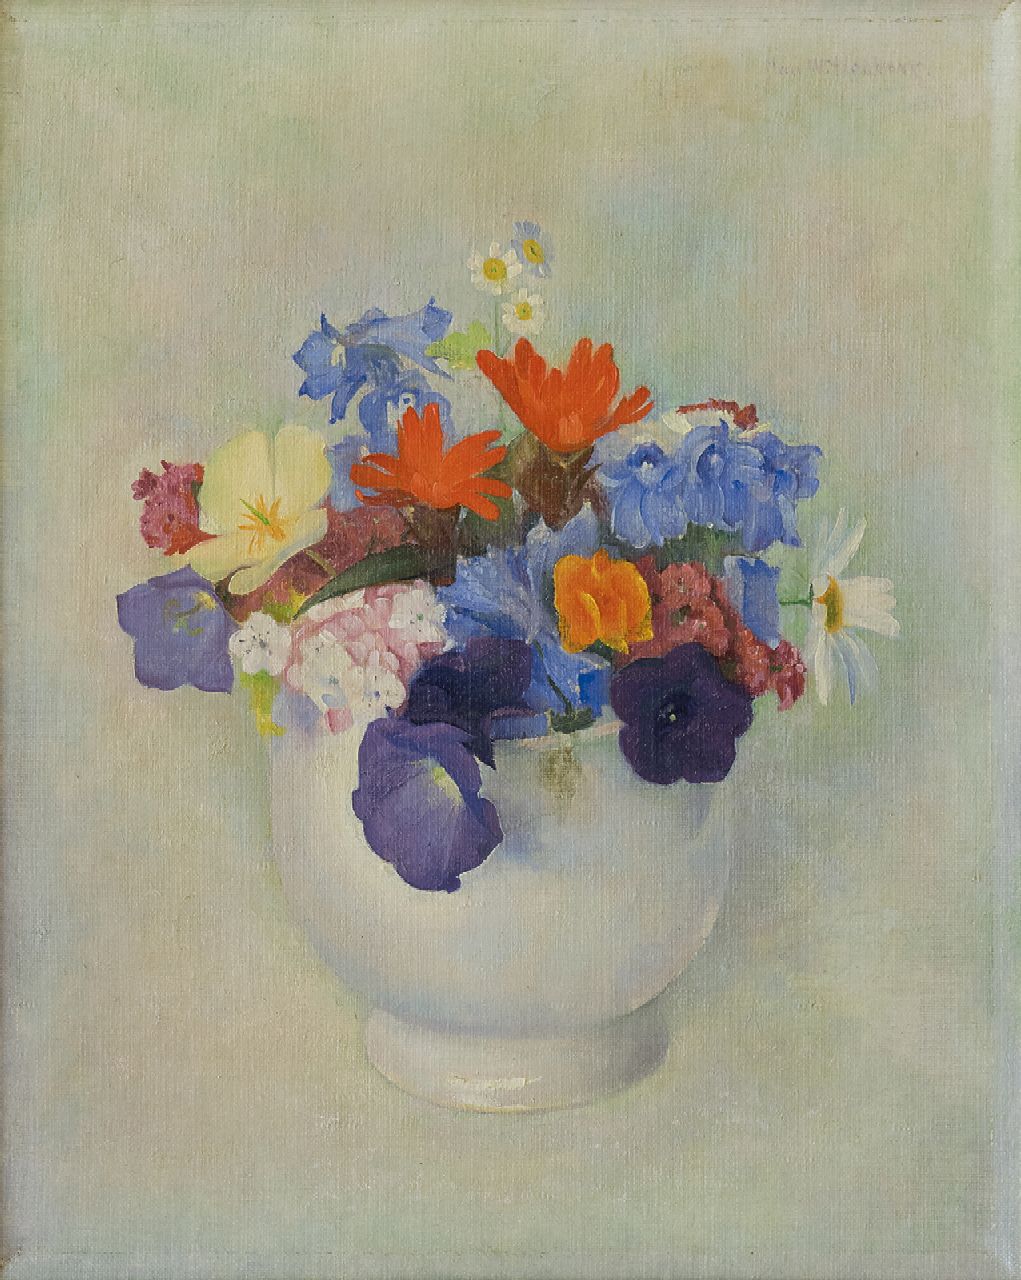 Jan Wittenberg | Flower still life, oil on canvas, 29.8 x 24.0 cm, signed u.r. and painted ca. 1940